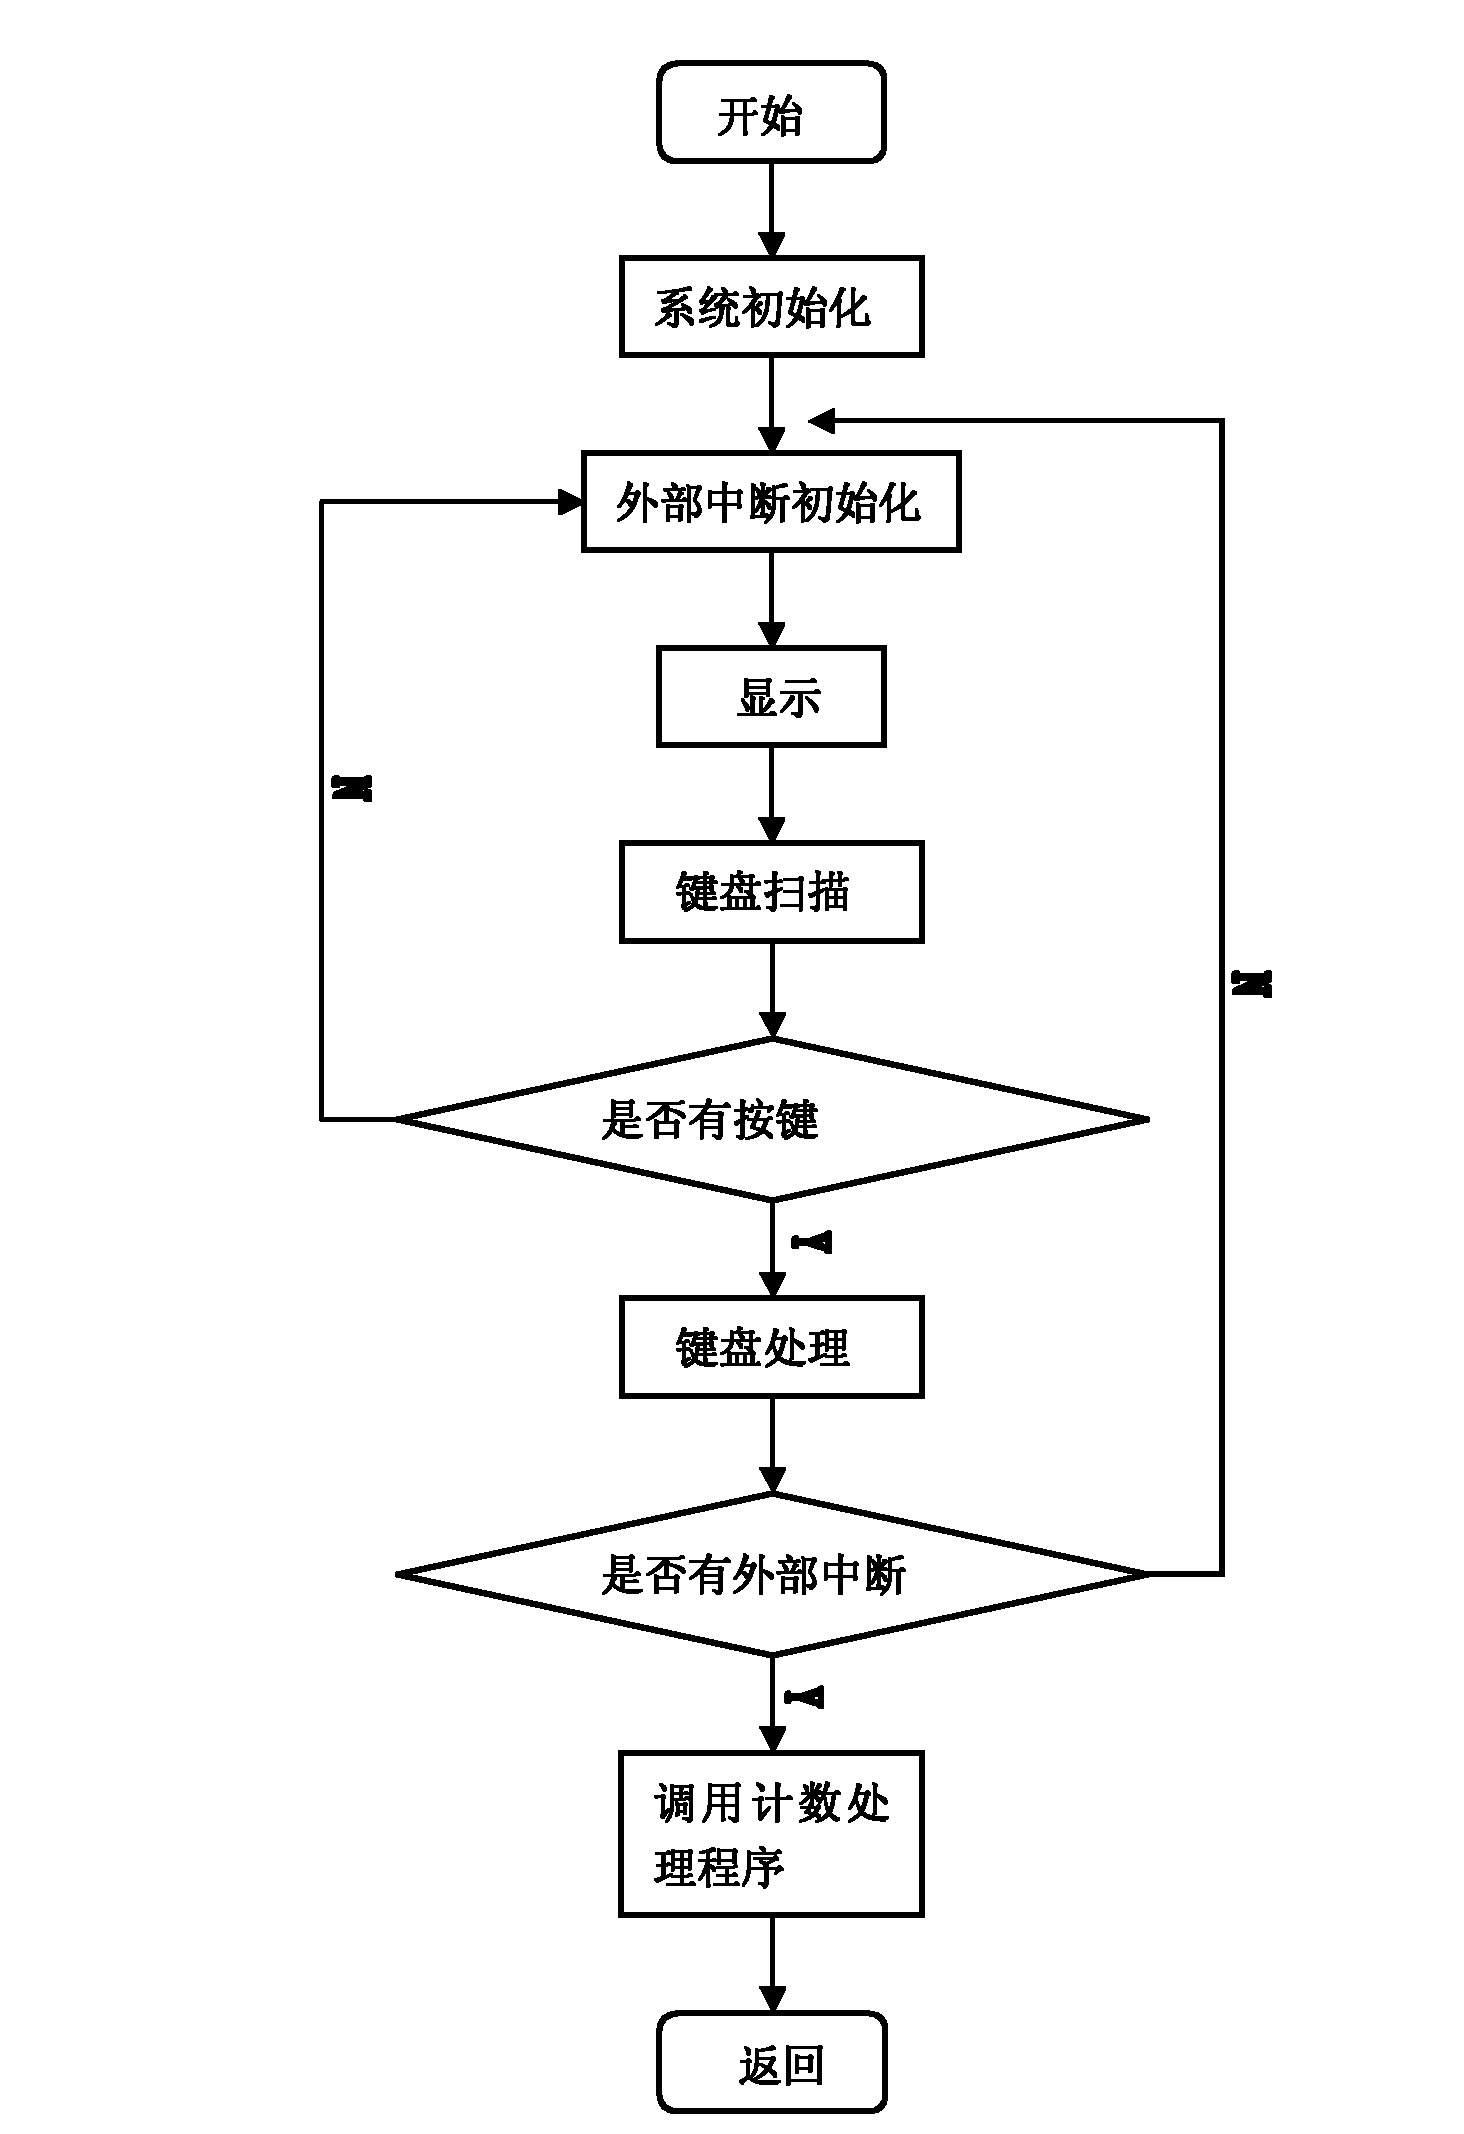 Digital electronic counting information processing method